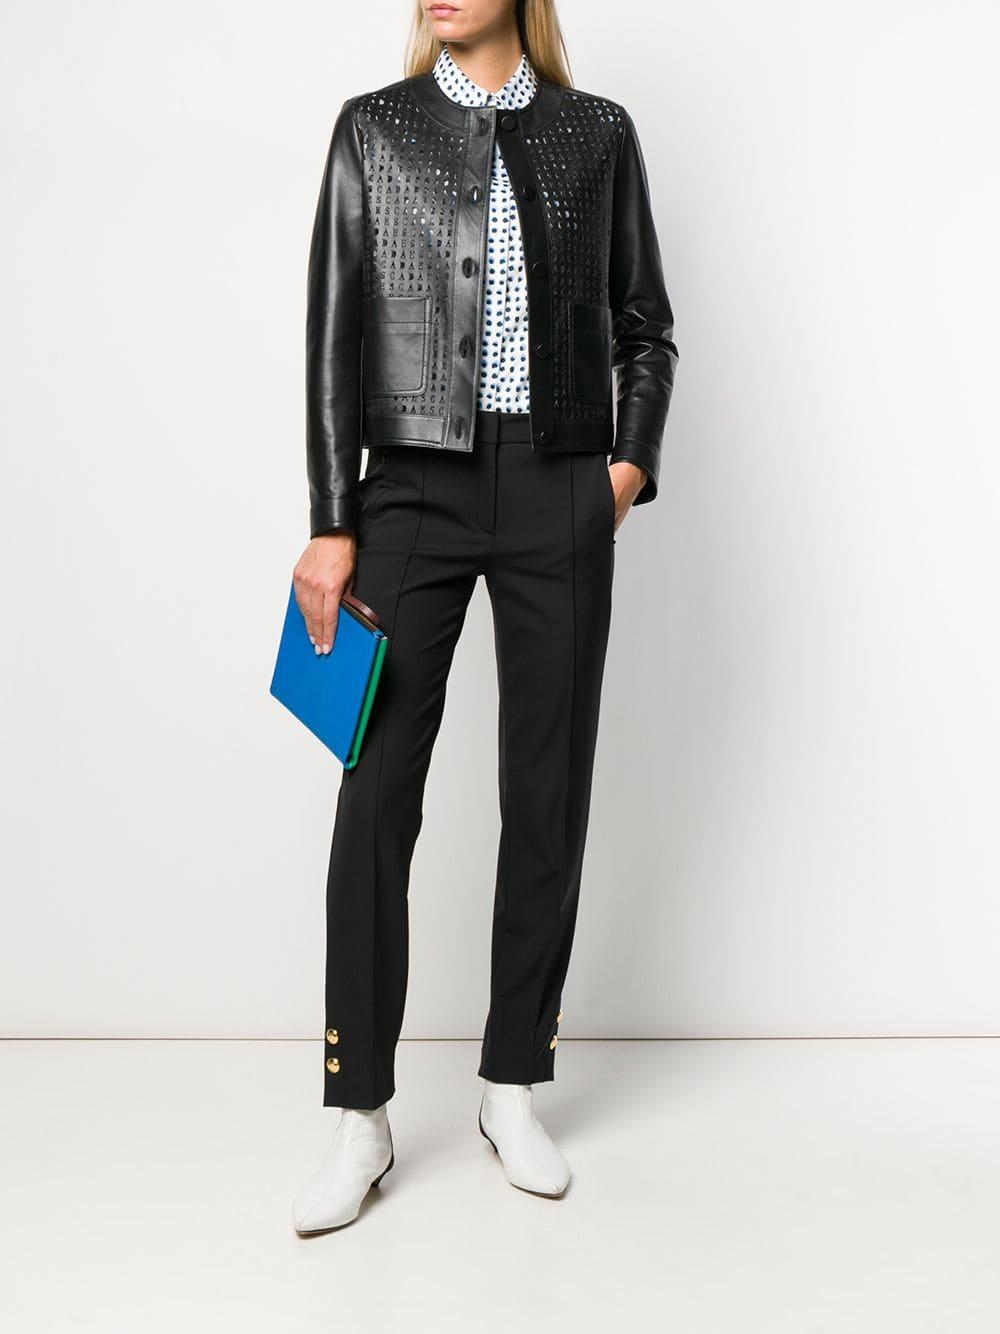 ESCADA Perforated Leather Jacket in Black - Lyst